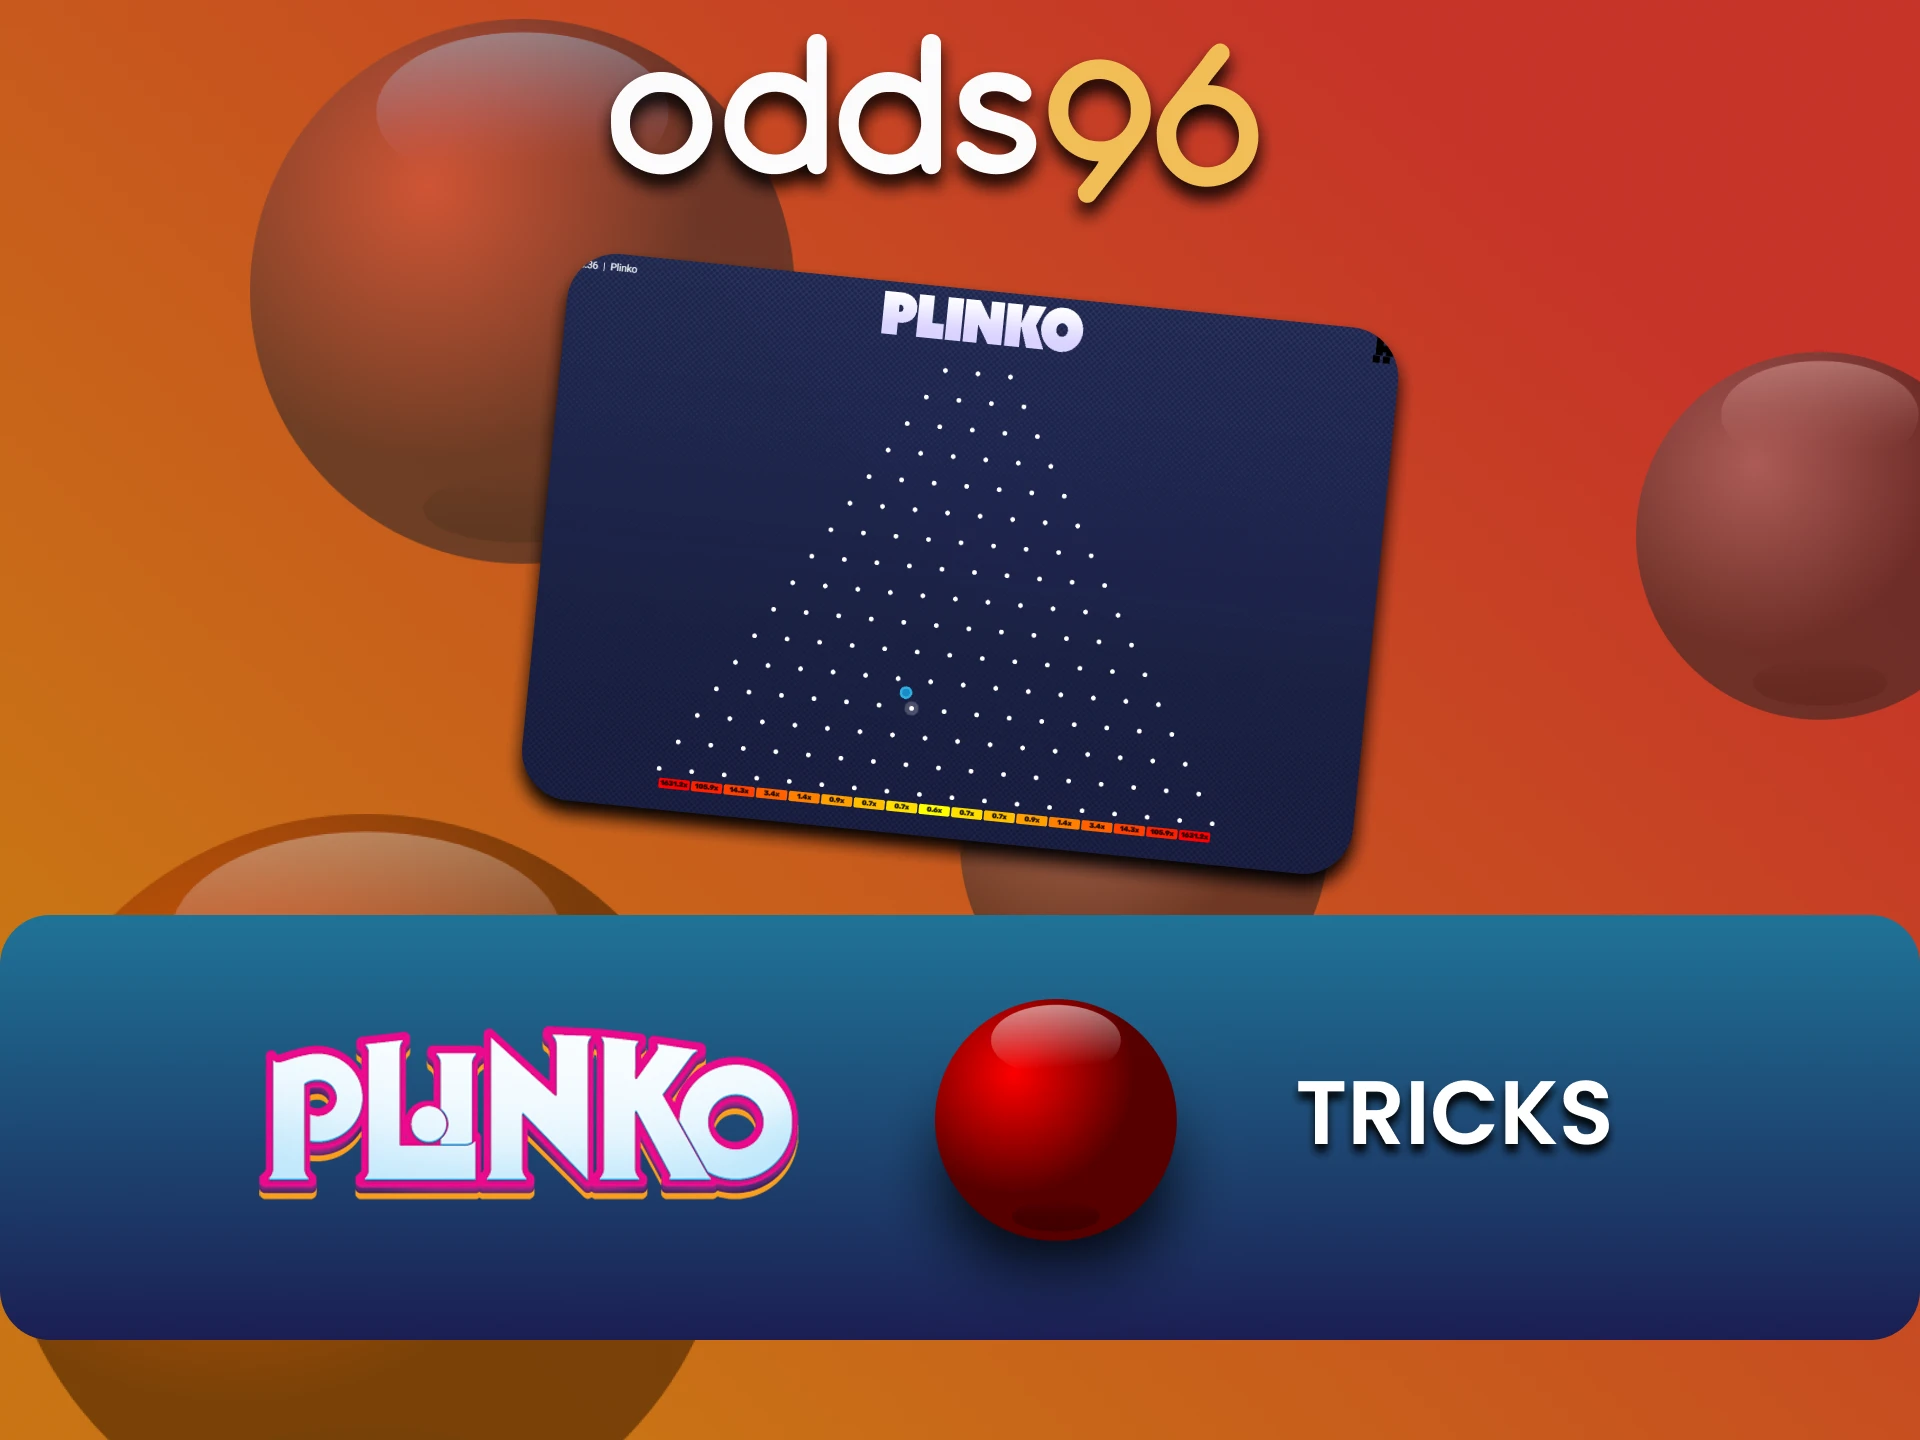 We will tell you about winning tricks for Plinko on odds96.